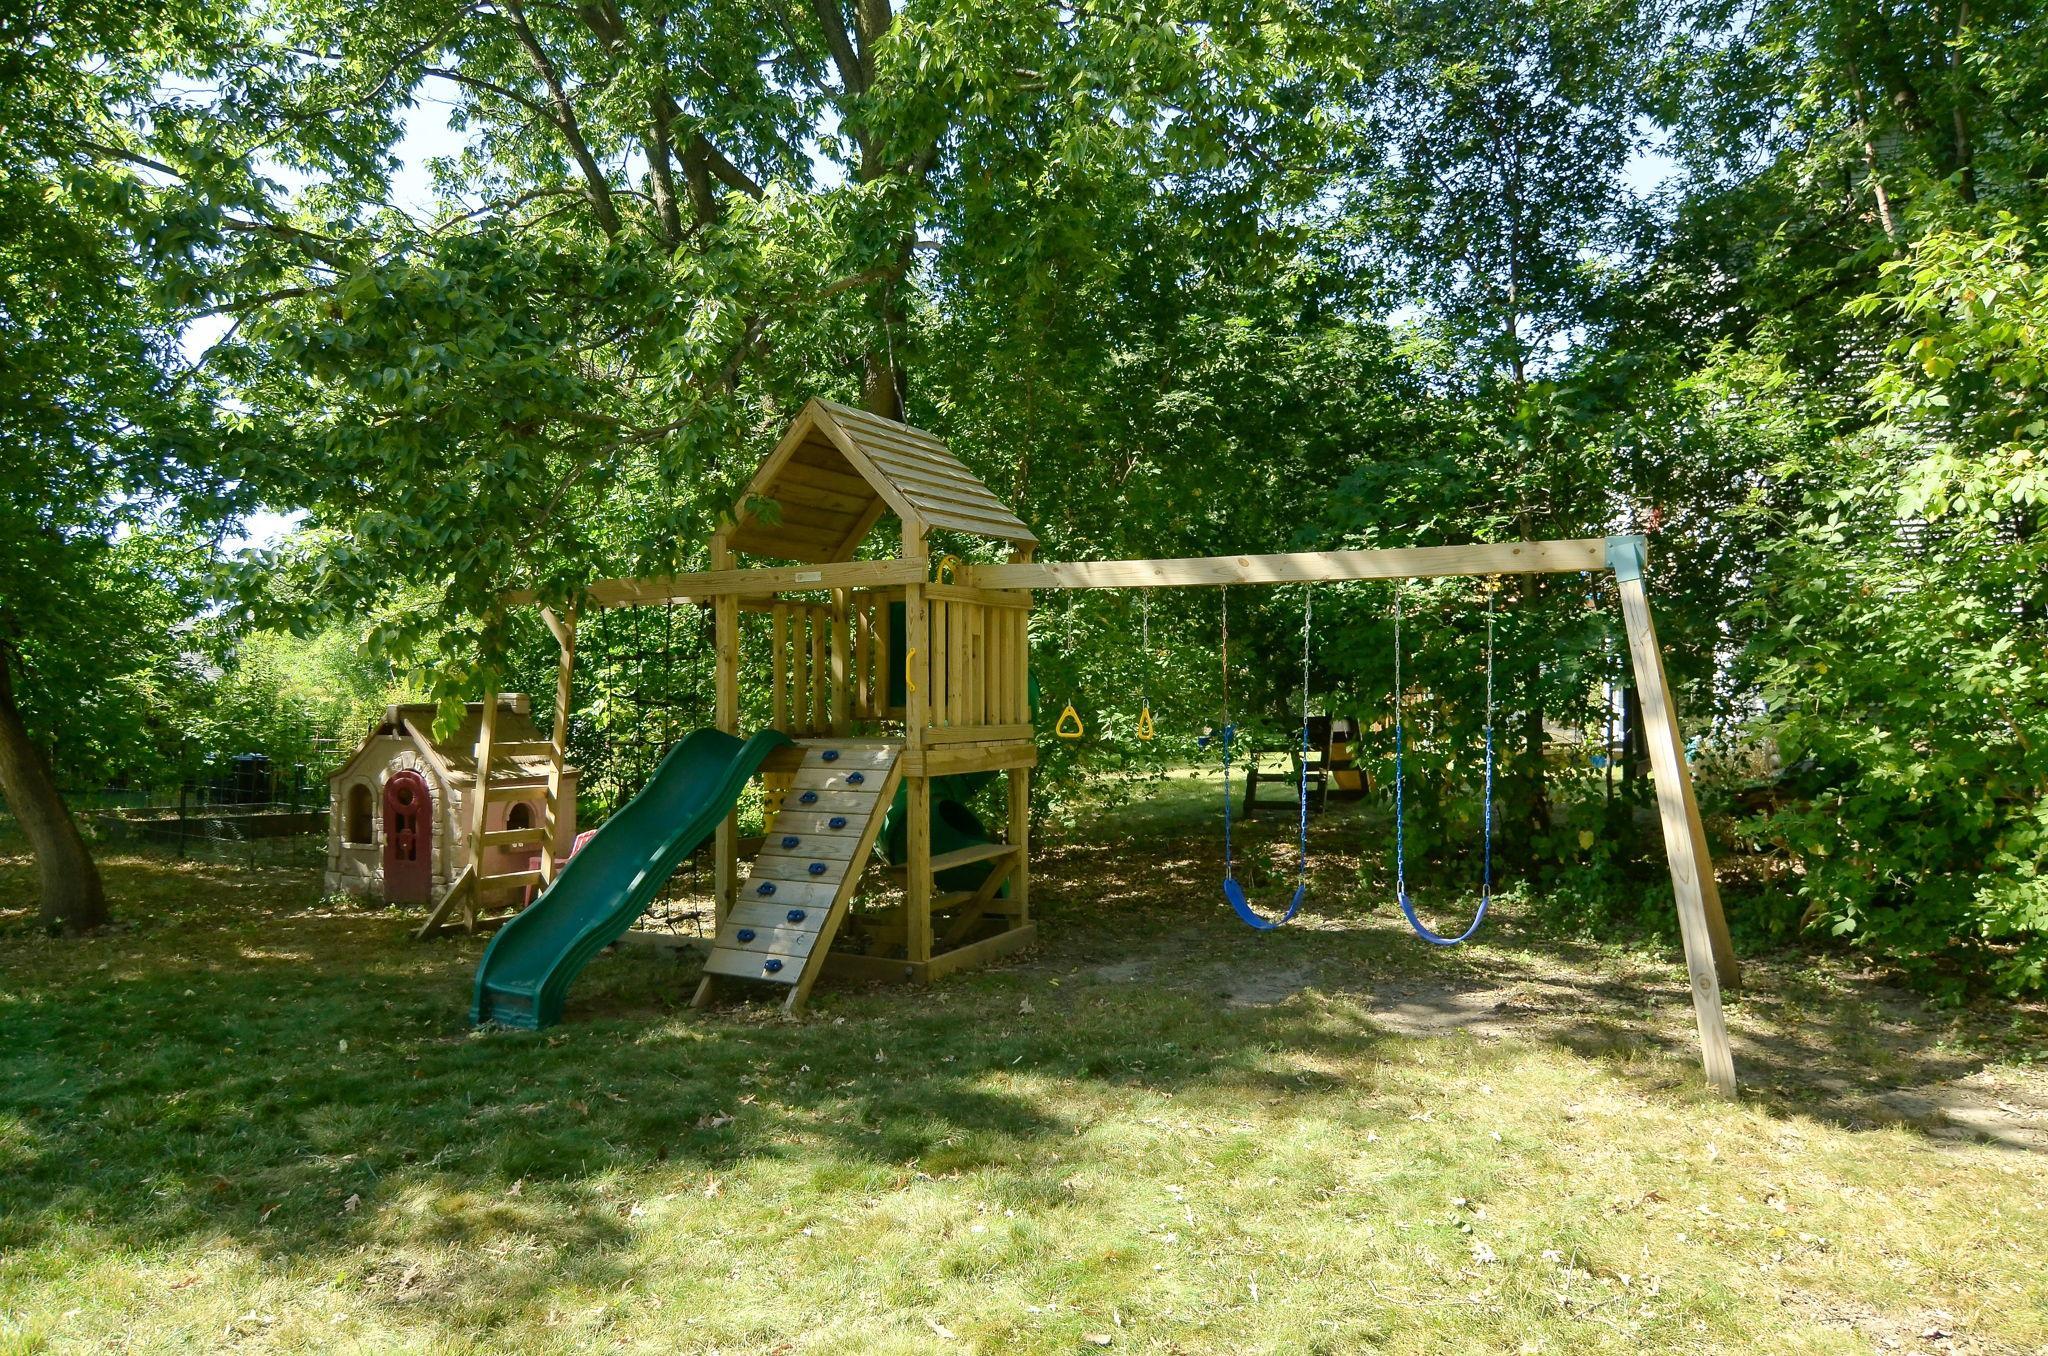 Playset does not stay, but this is an incredible space for children.